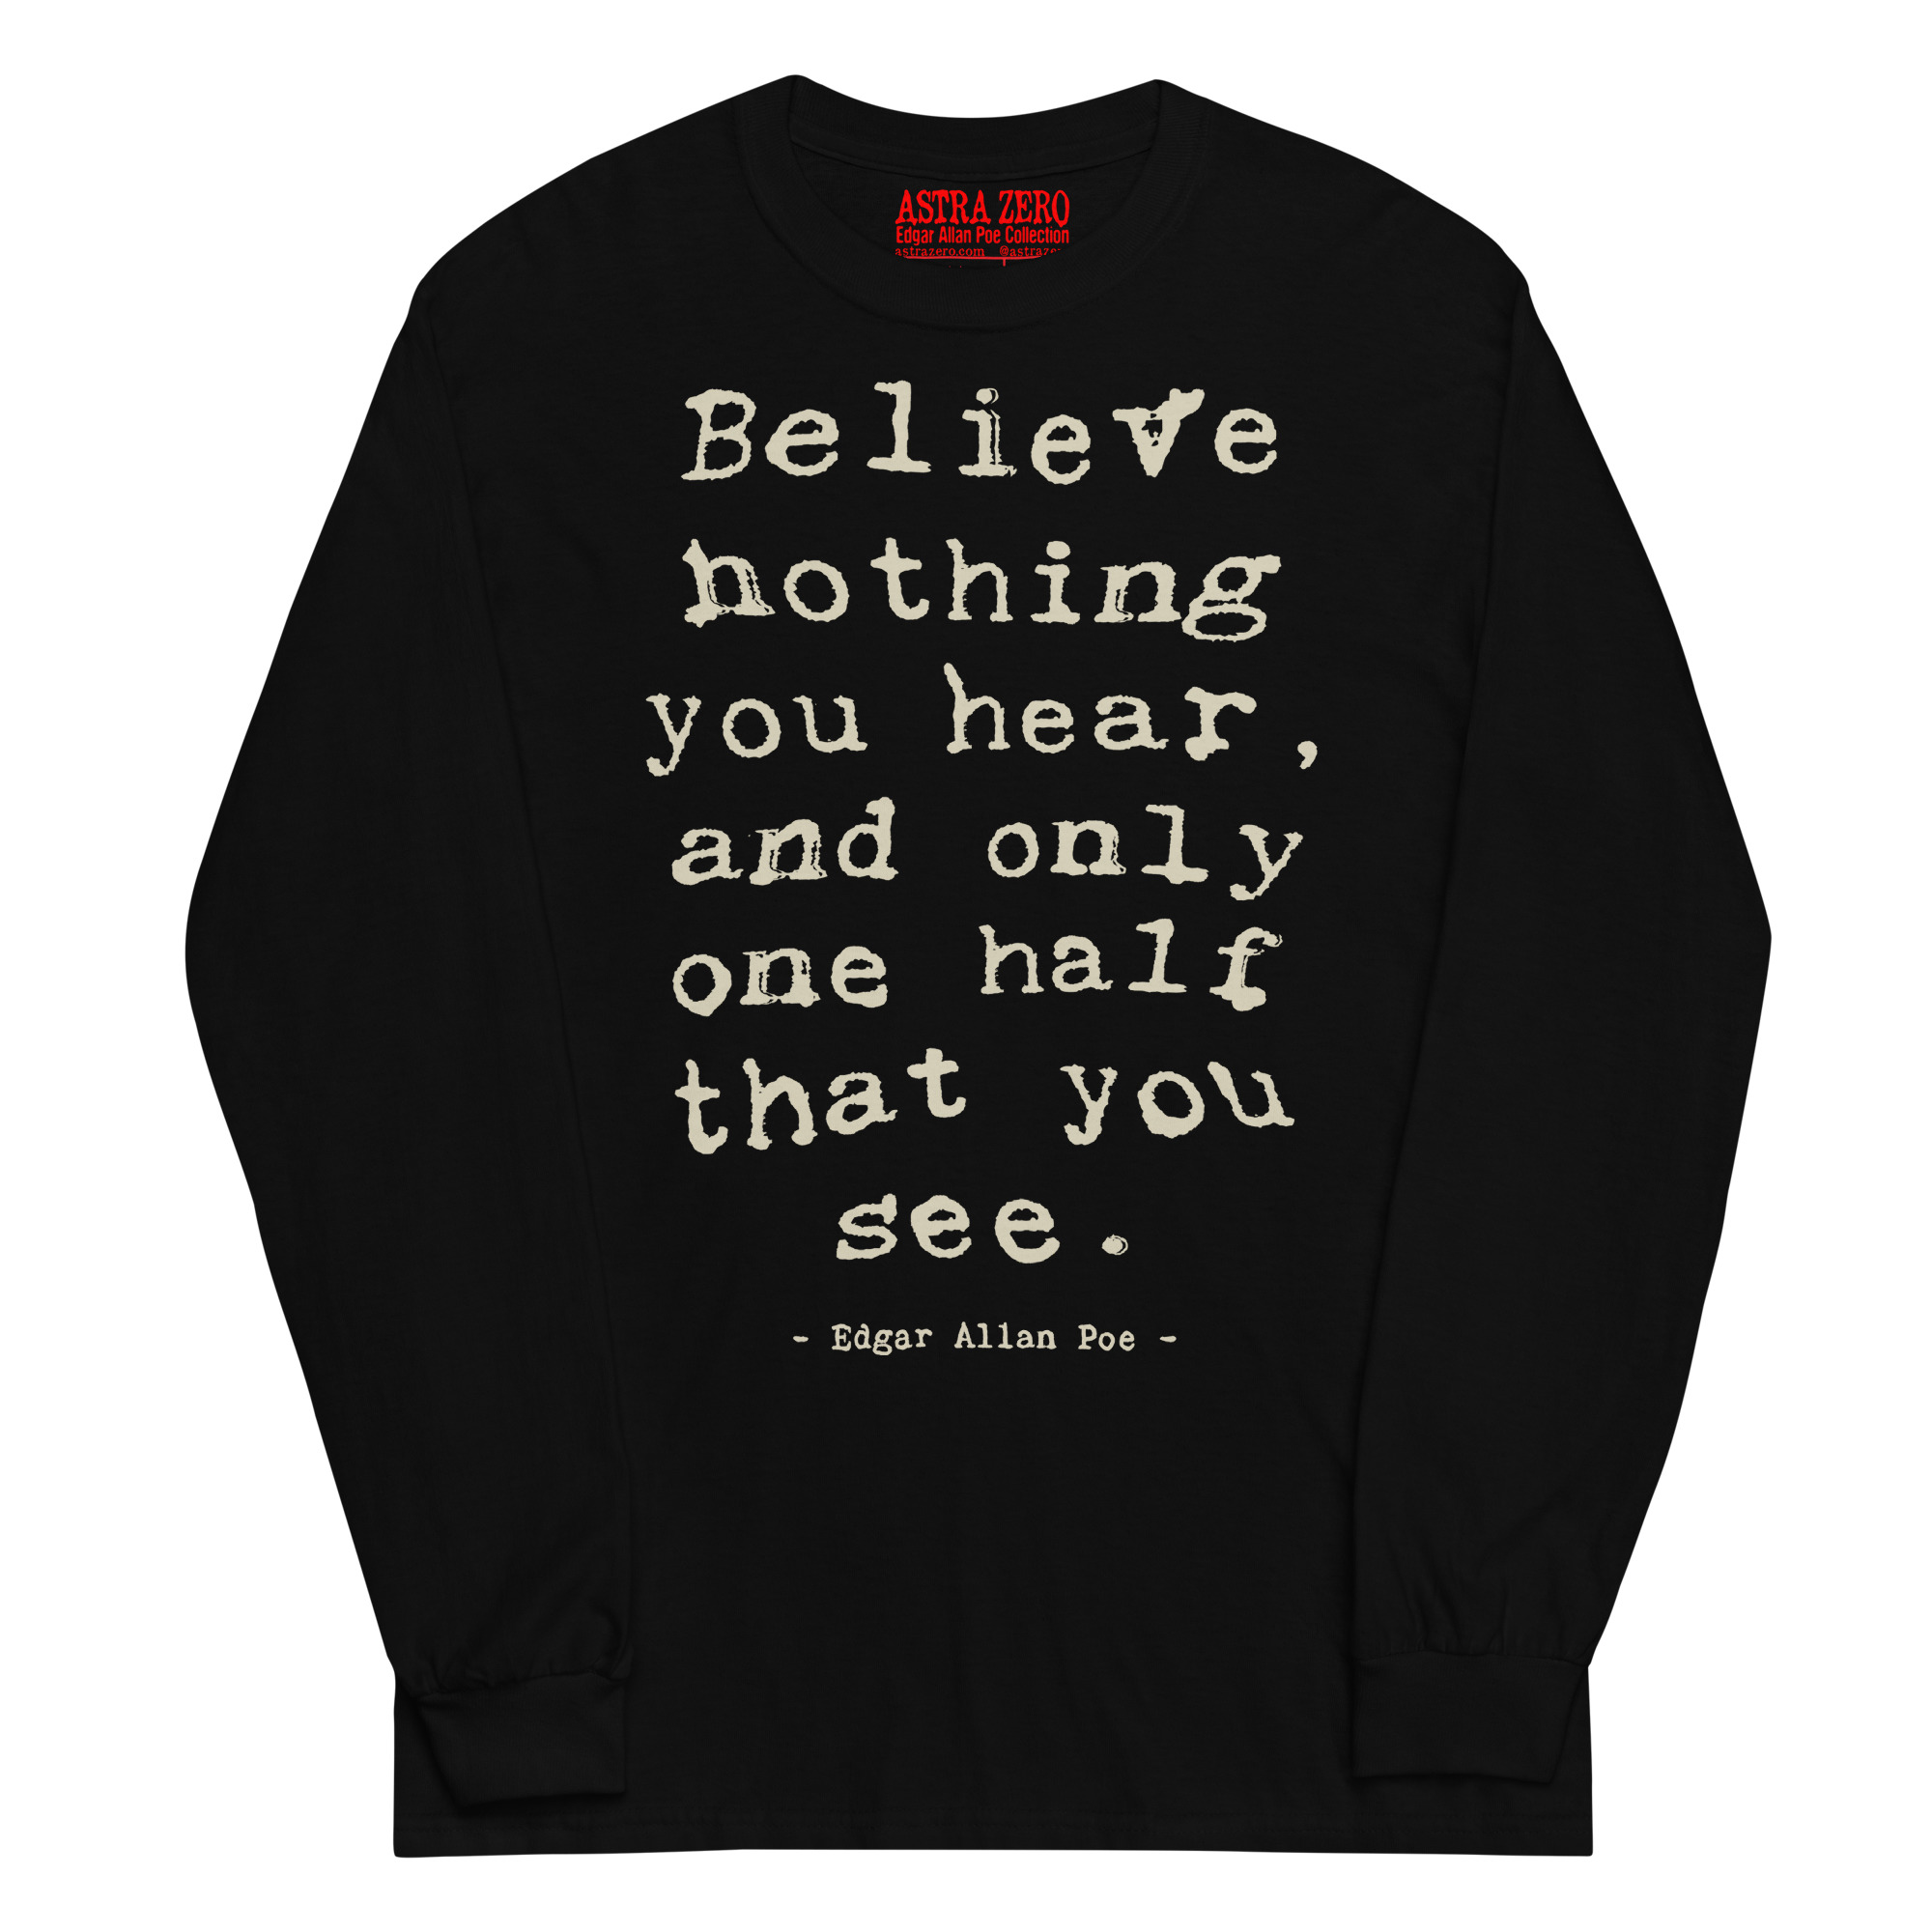 Featured image for “Believe Nothing You Hear - Long Sleeve Gildan Shirt”